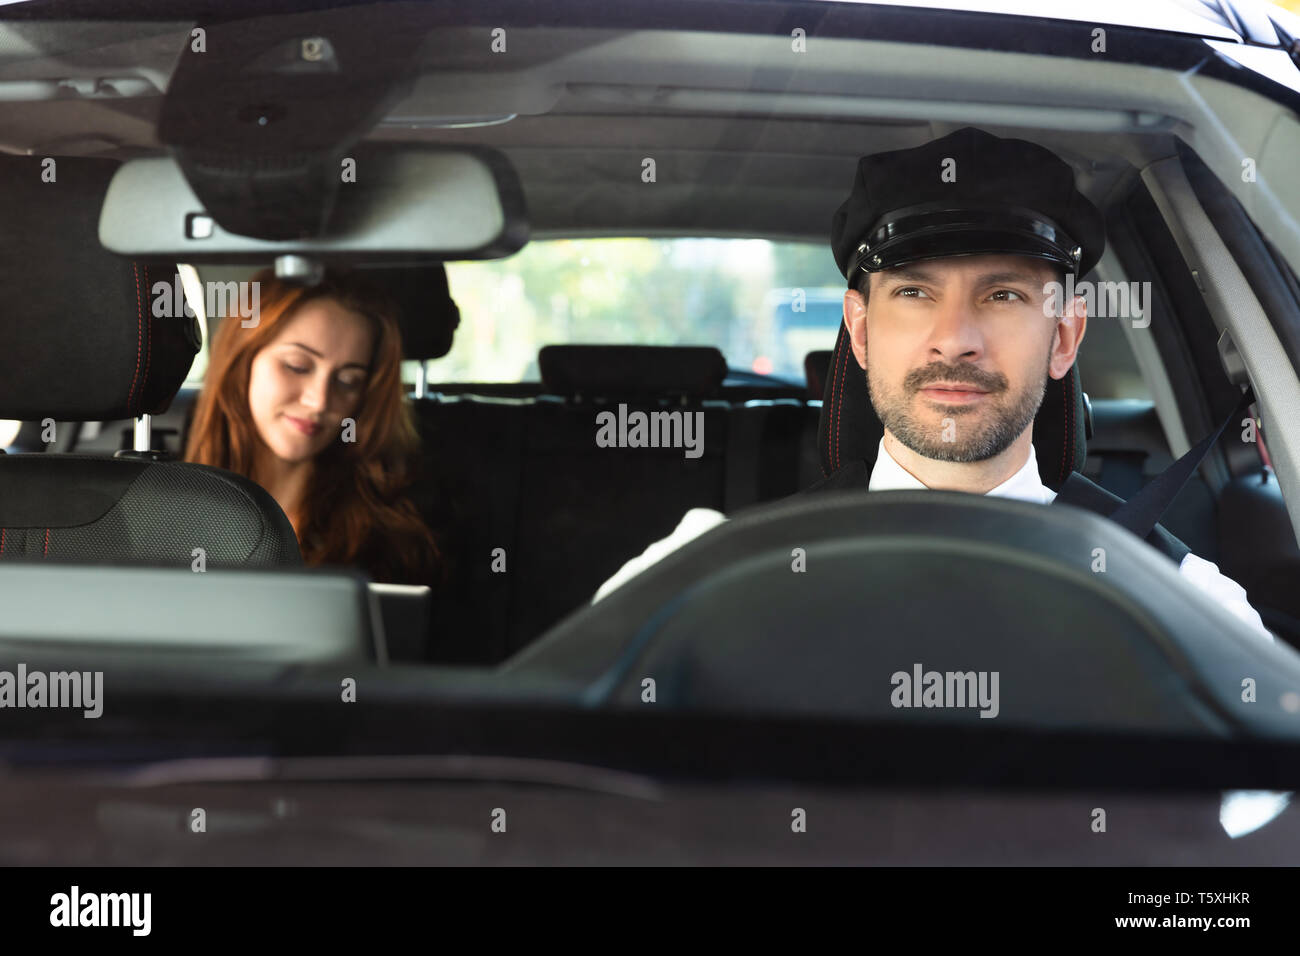 Portrait Of A Smiling Male Chauffeur Driving Car With Businesswoman Stock Photo